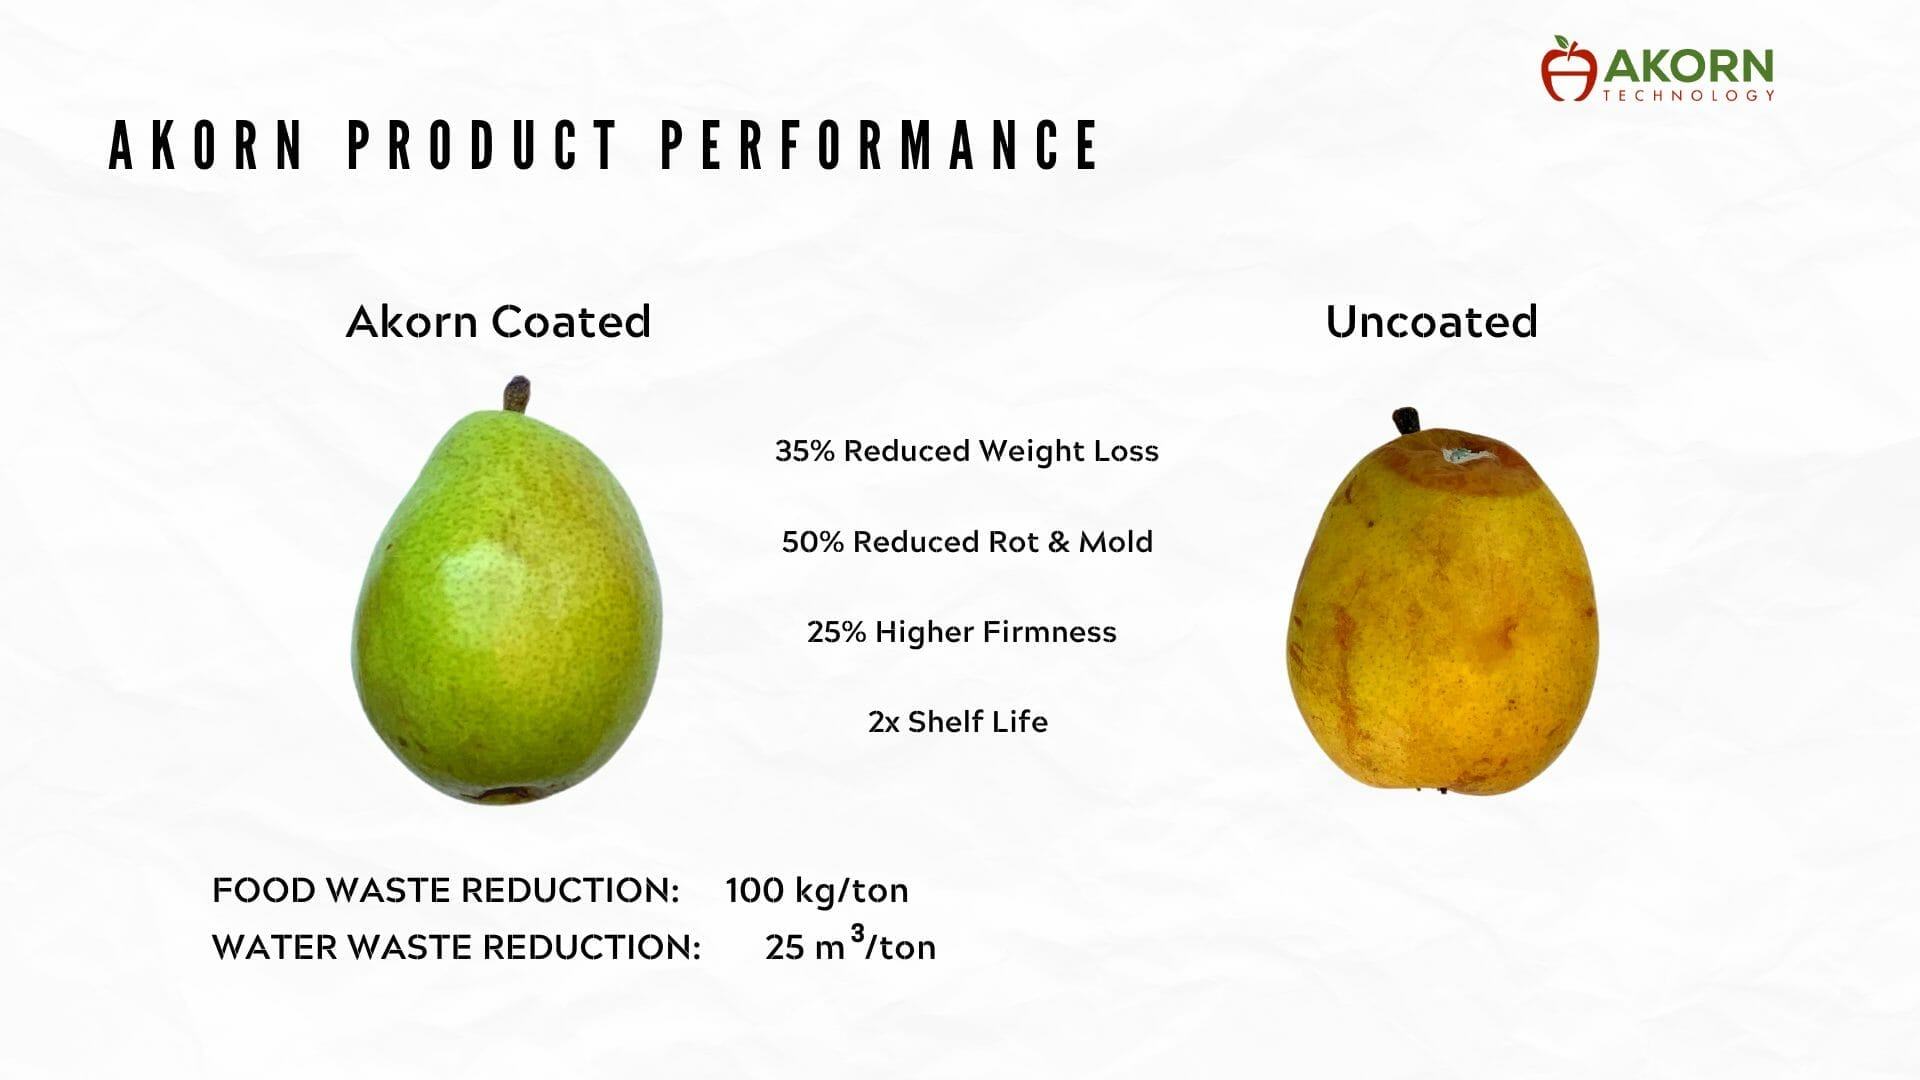 AKORN PRODUCT PERFORMANCE PEAR SIDE BY SIDE